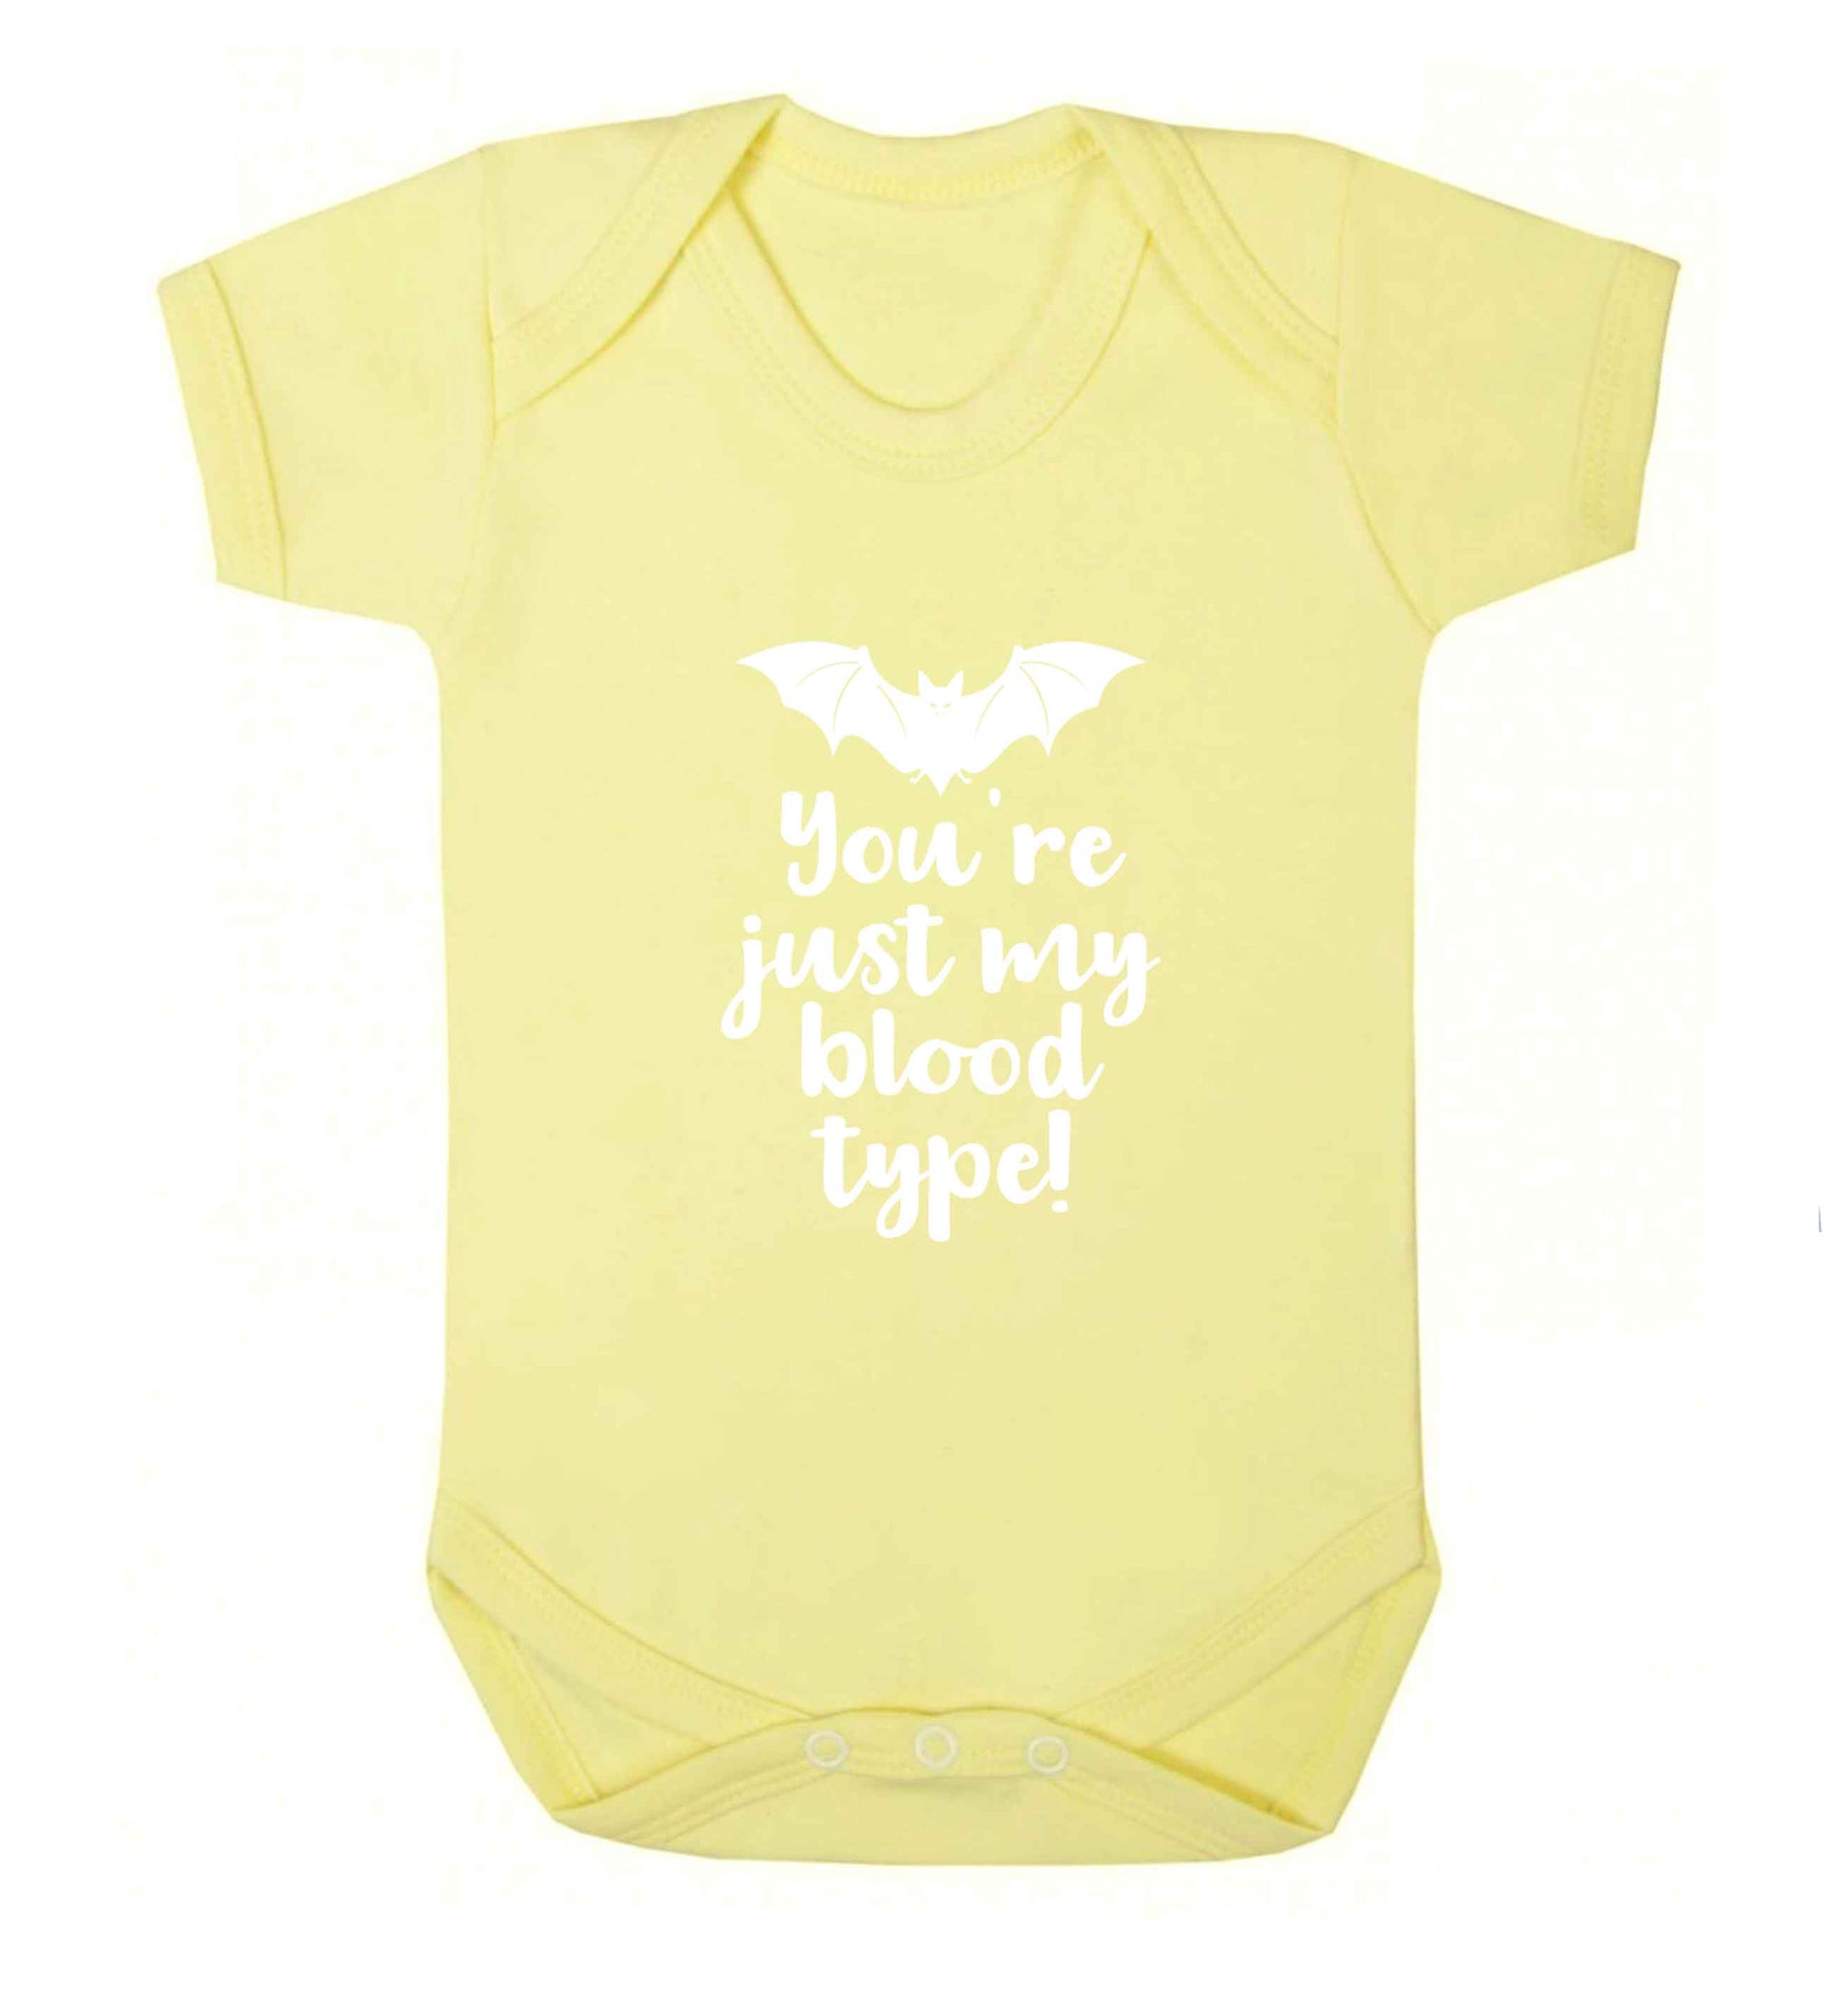 You're just my blood type baby vest pale yellow 18-24 months